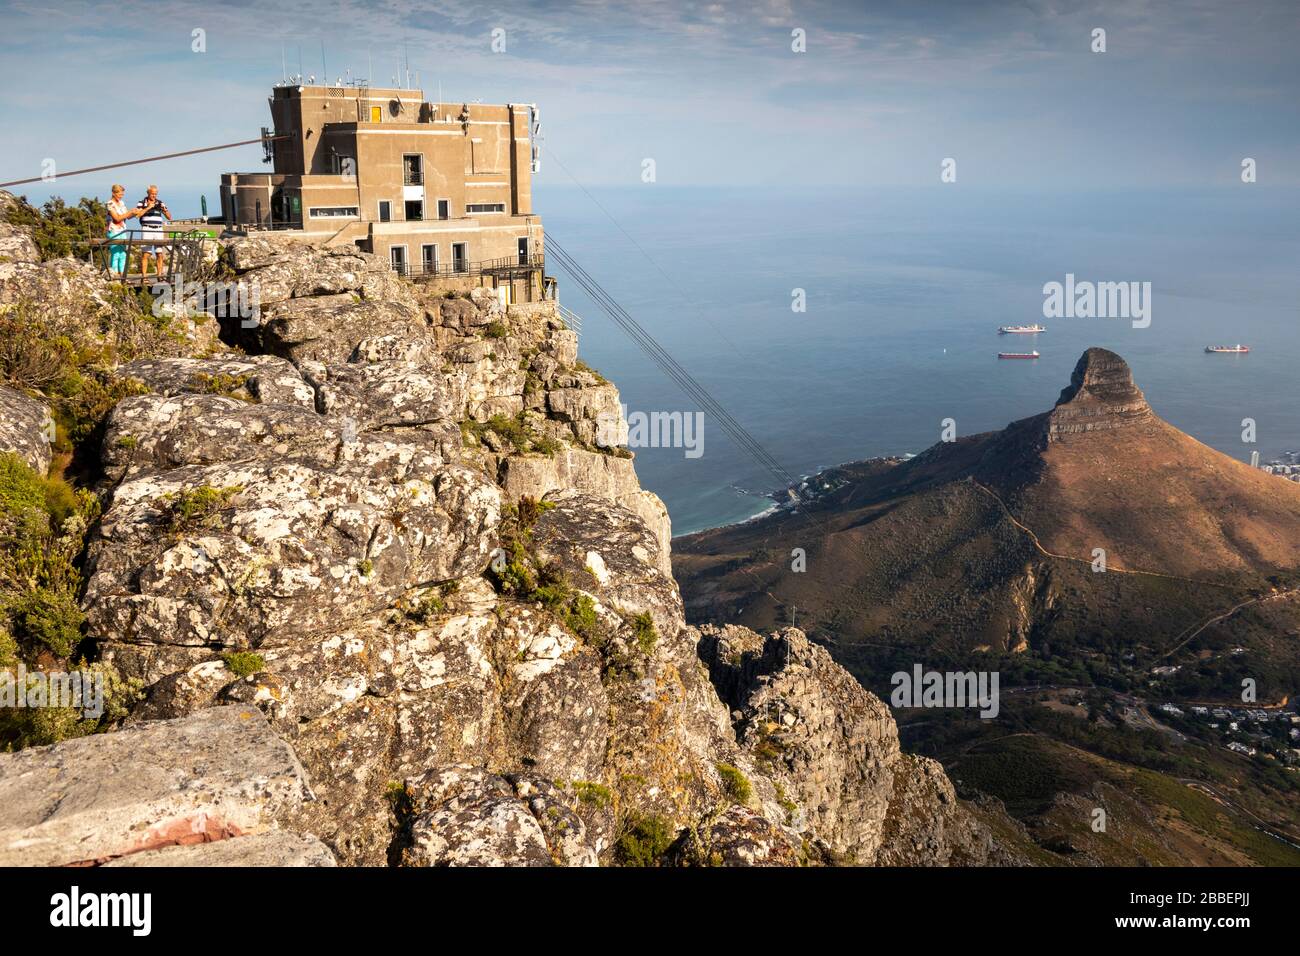 South Africa, Cape Town, Tafelberg Road, Table Mountain, elevated view of upper Aerial Cableway station wit Atlantic Ocean beyond Lion’s Head Peak Stock Photo